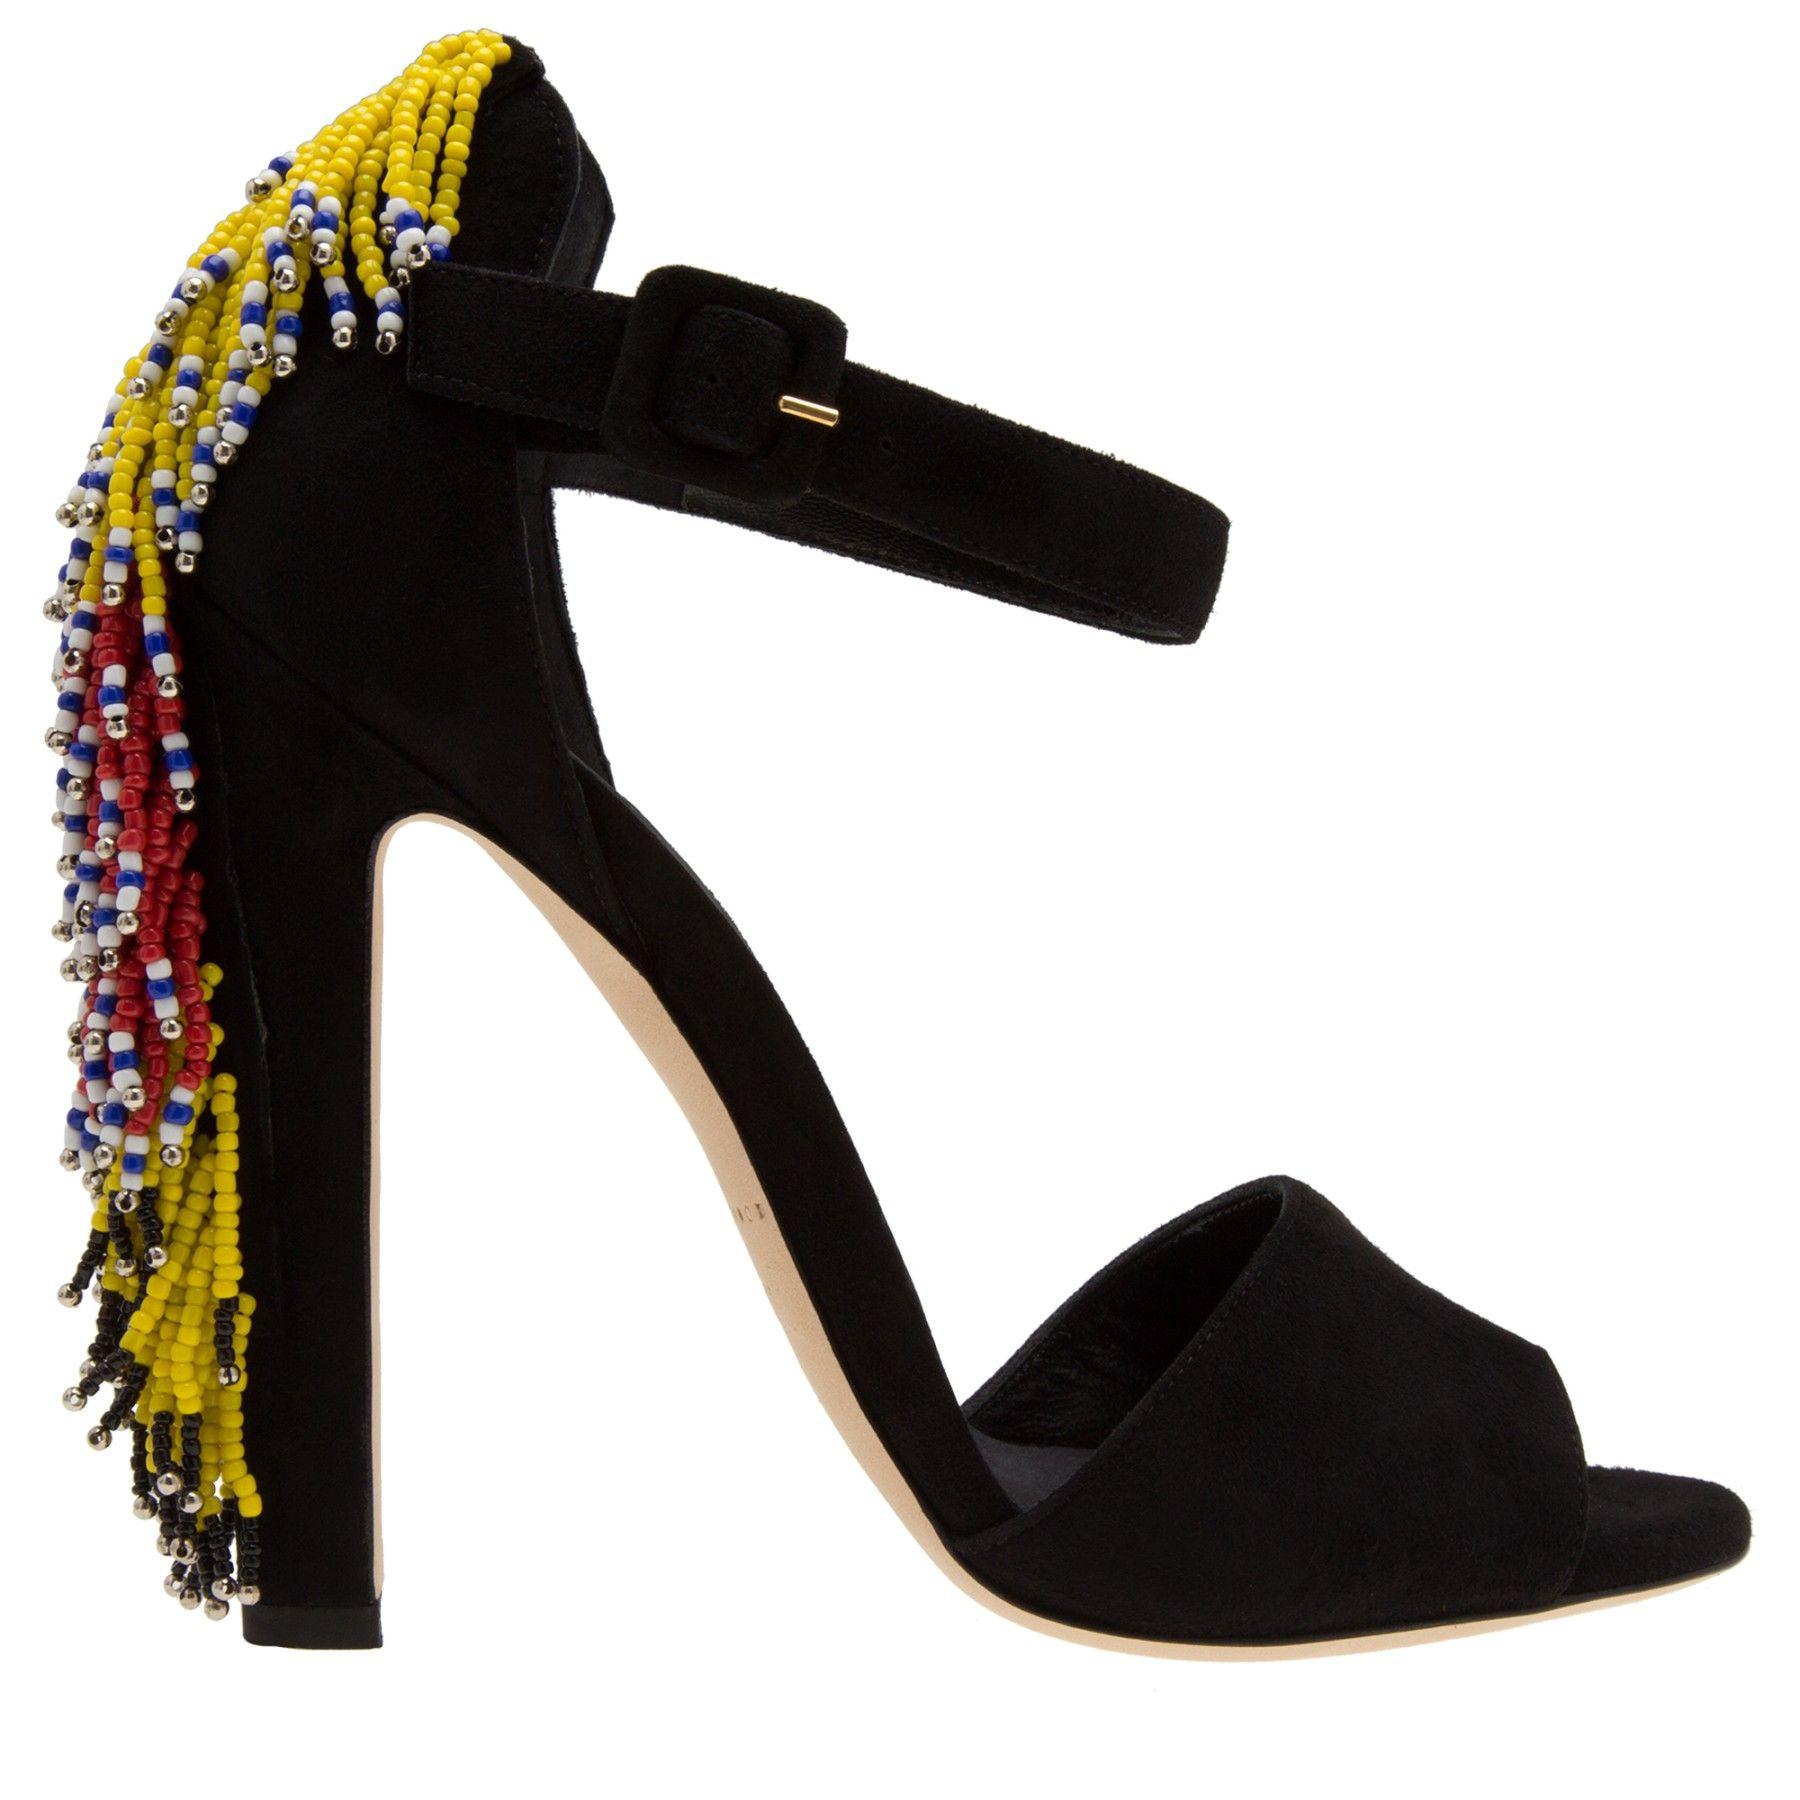 Brian Atwood Logo - Brian Atwood Irene beaded suede sandals for Women